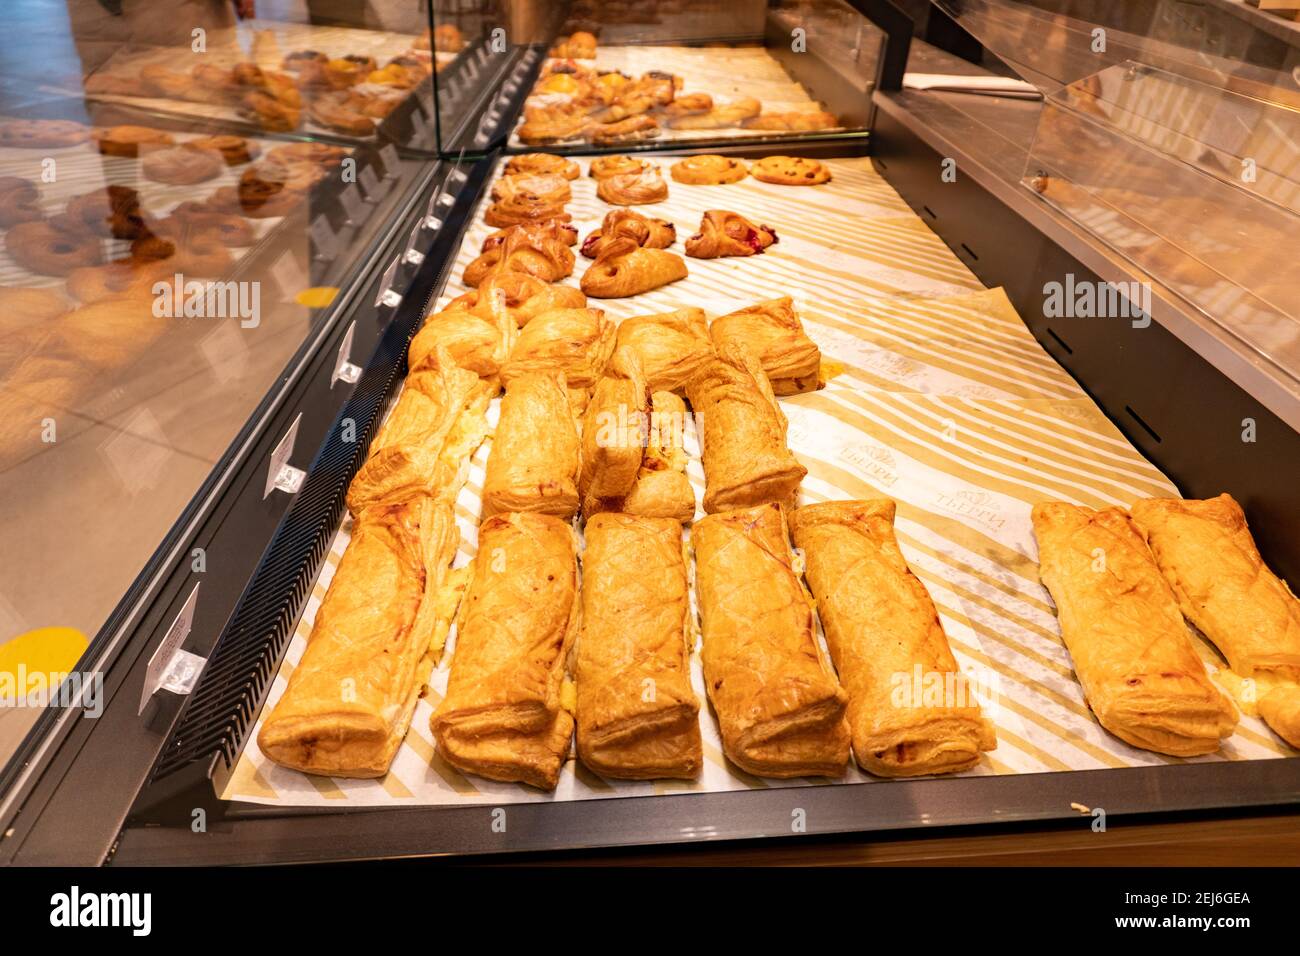 Variety of baked products at a supermarket. Display of a bakery there is a wide variety of baked goods to offer Stock Photo